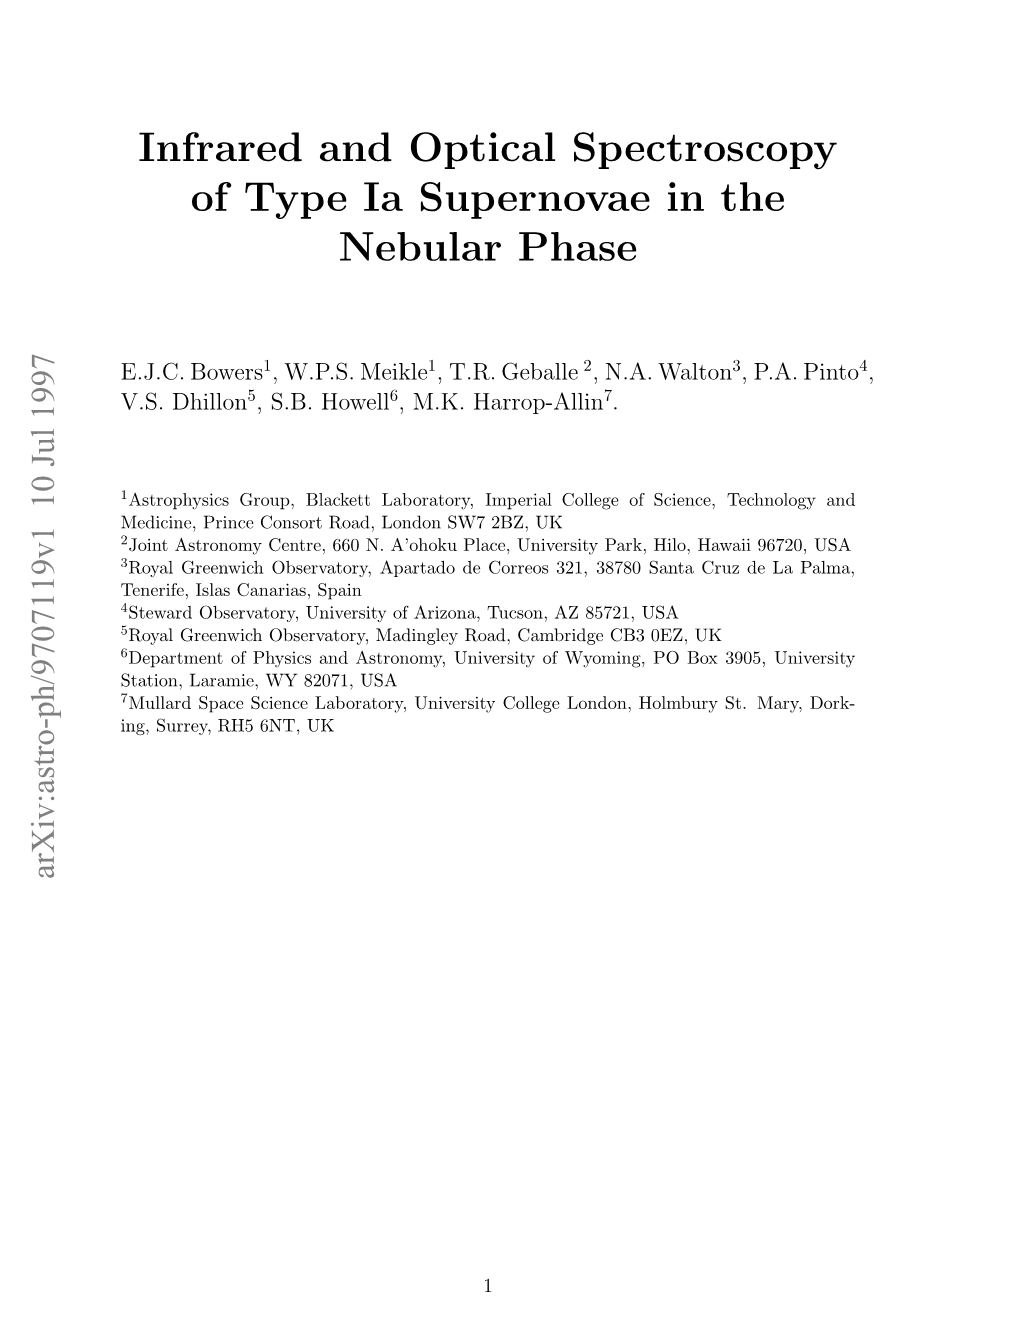 Infrared and Optical Spectroscopy of Type Ia Supernovae in the Nebular